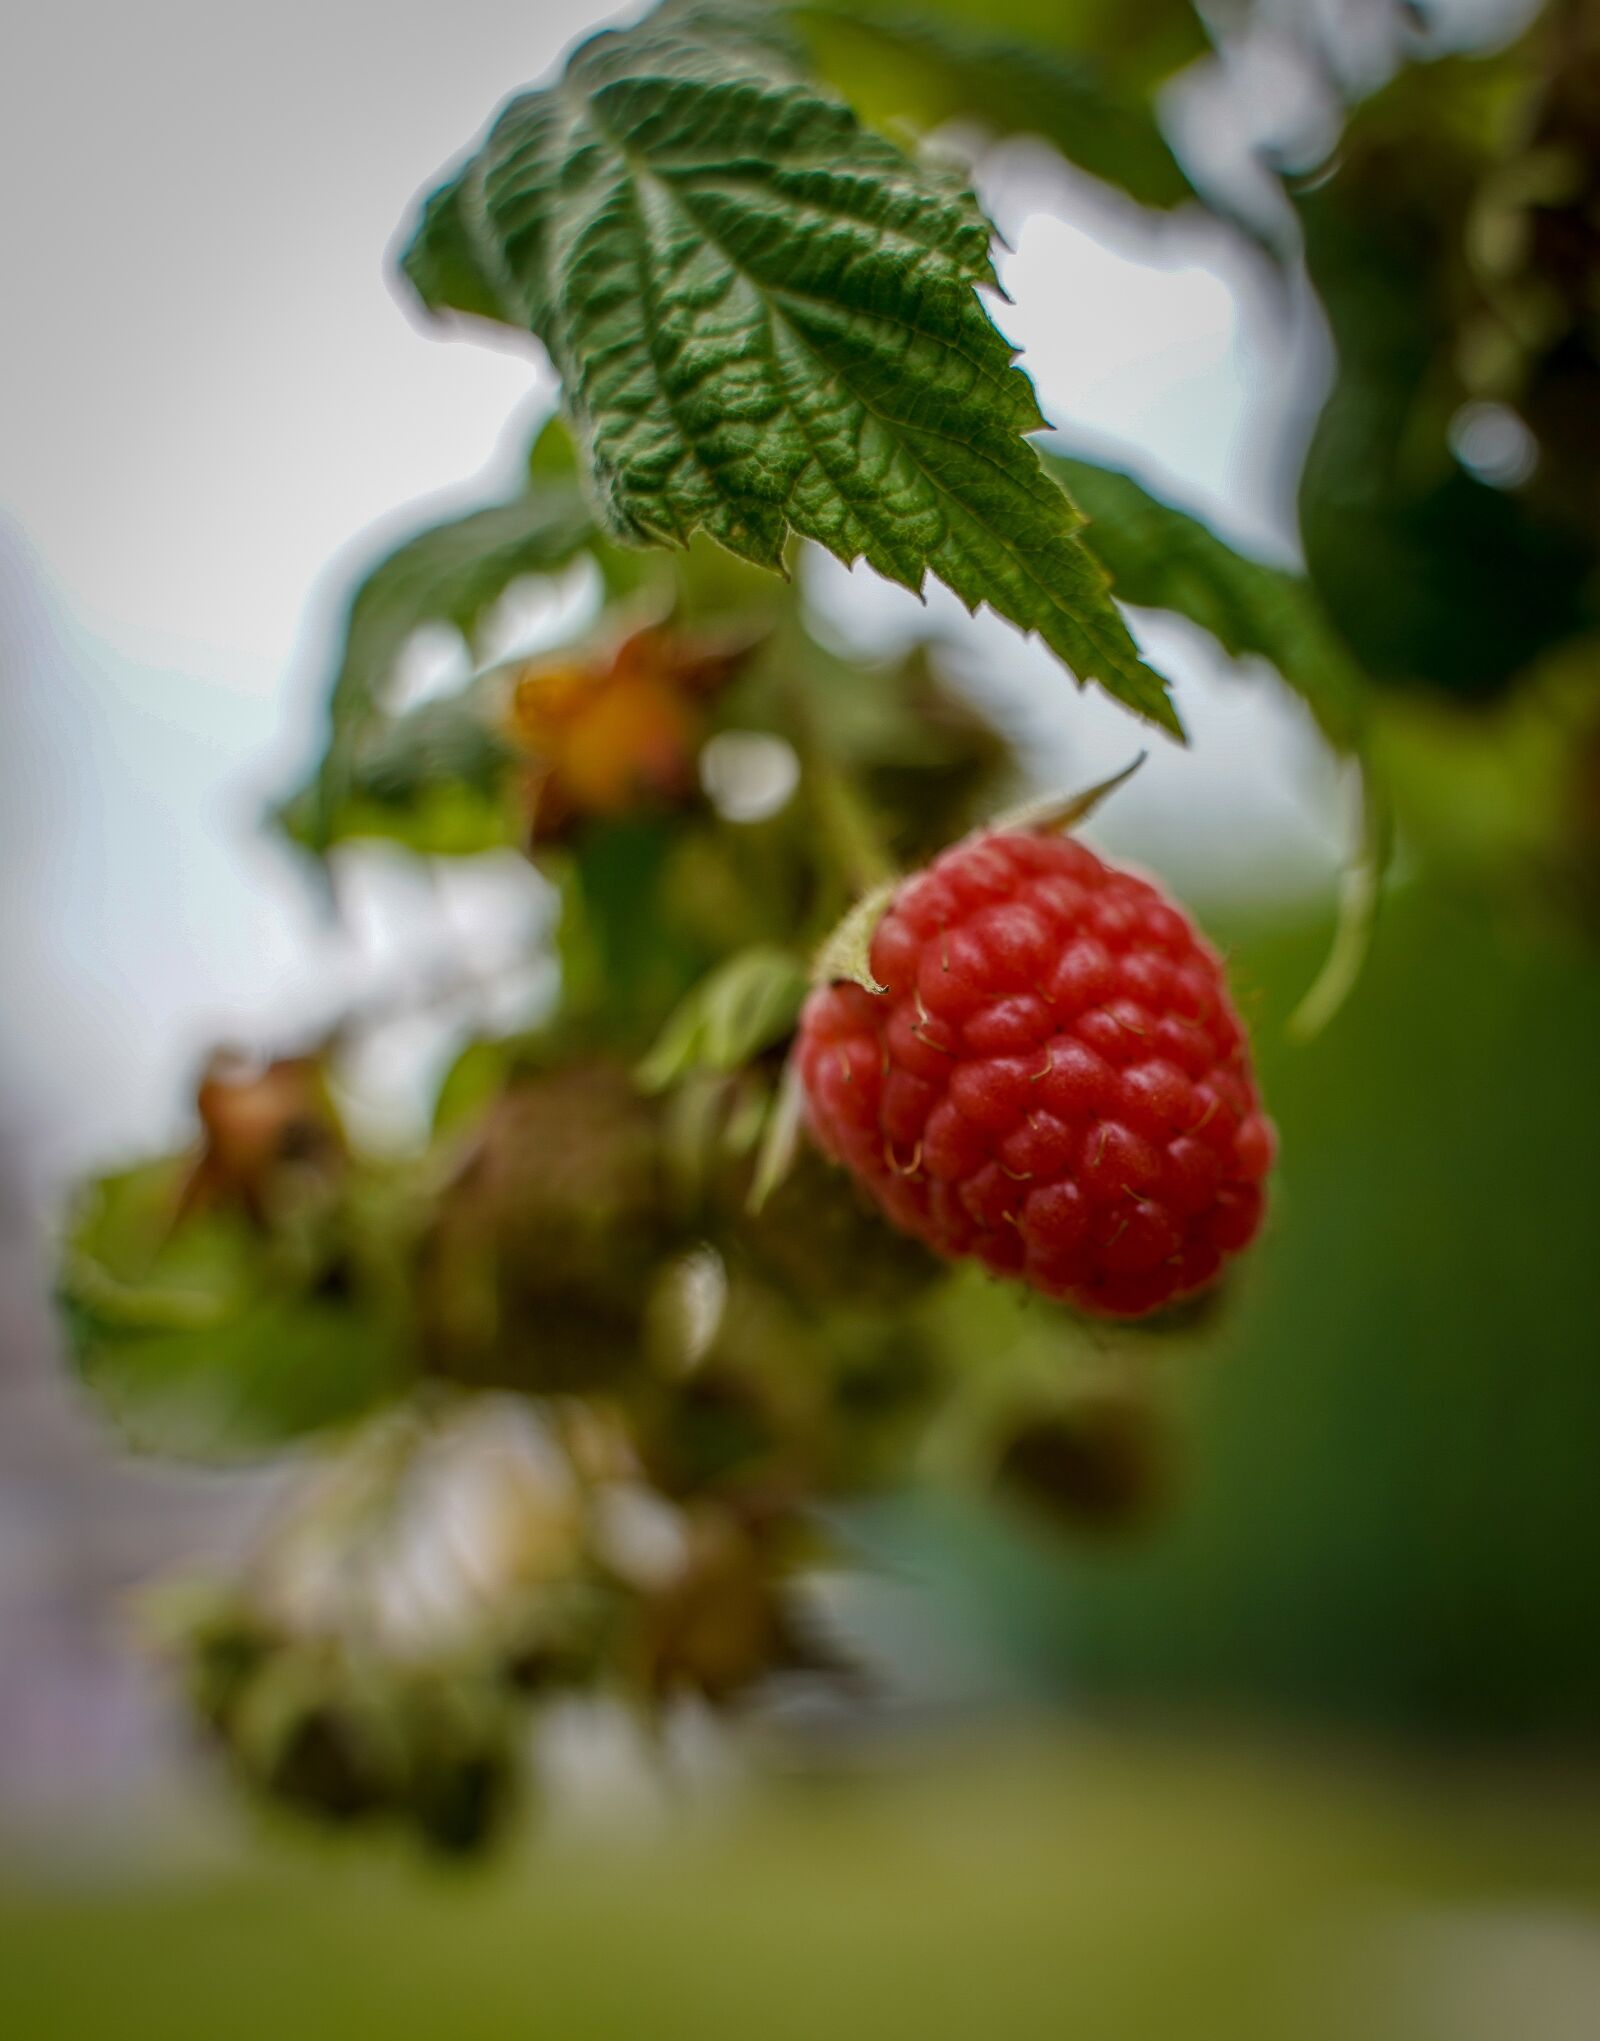 Sony a7 III sample photo. Raspberry, himbeerstrauch, fruit photography